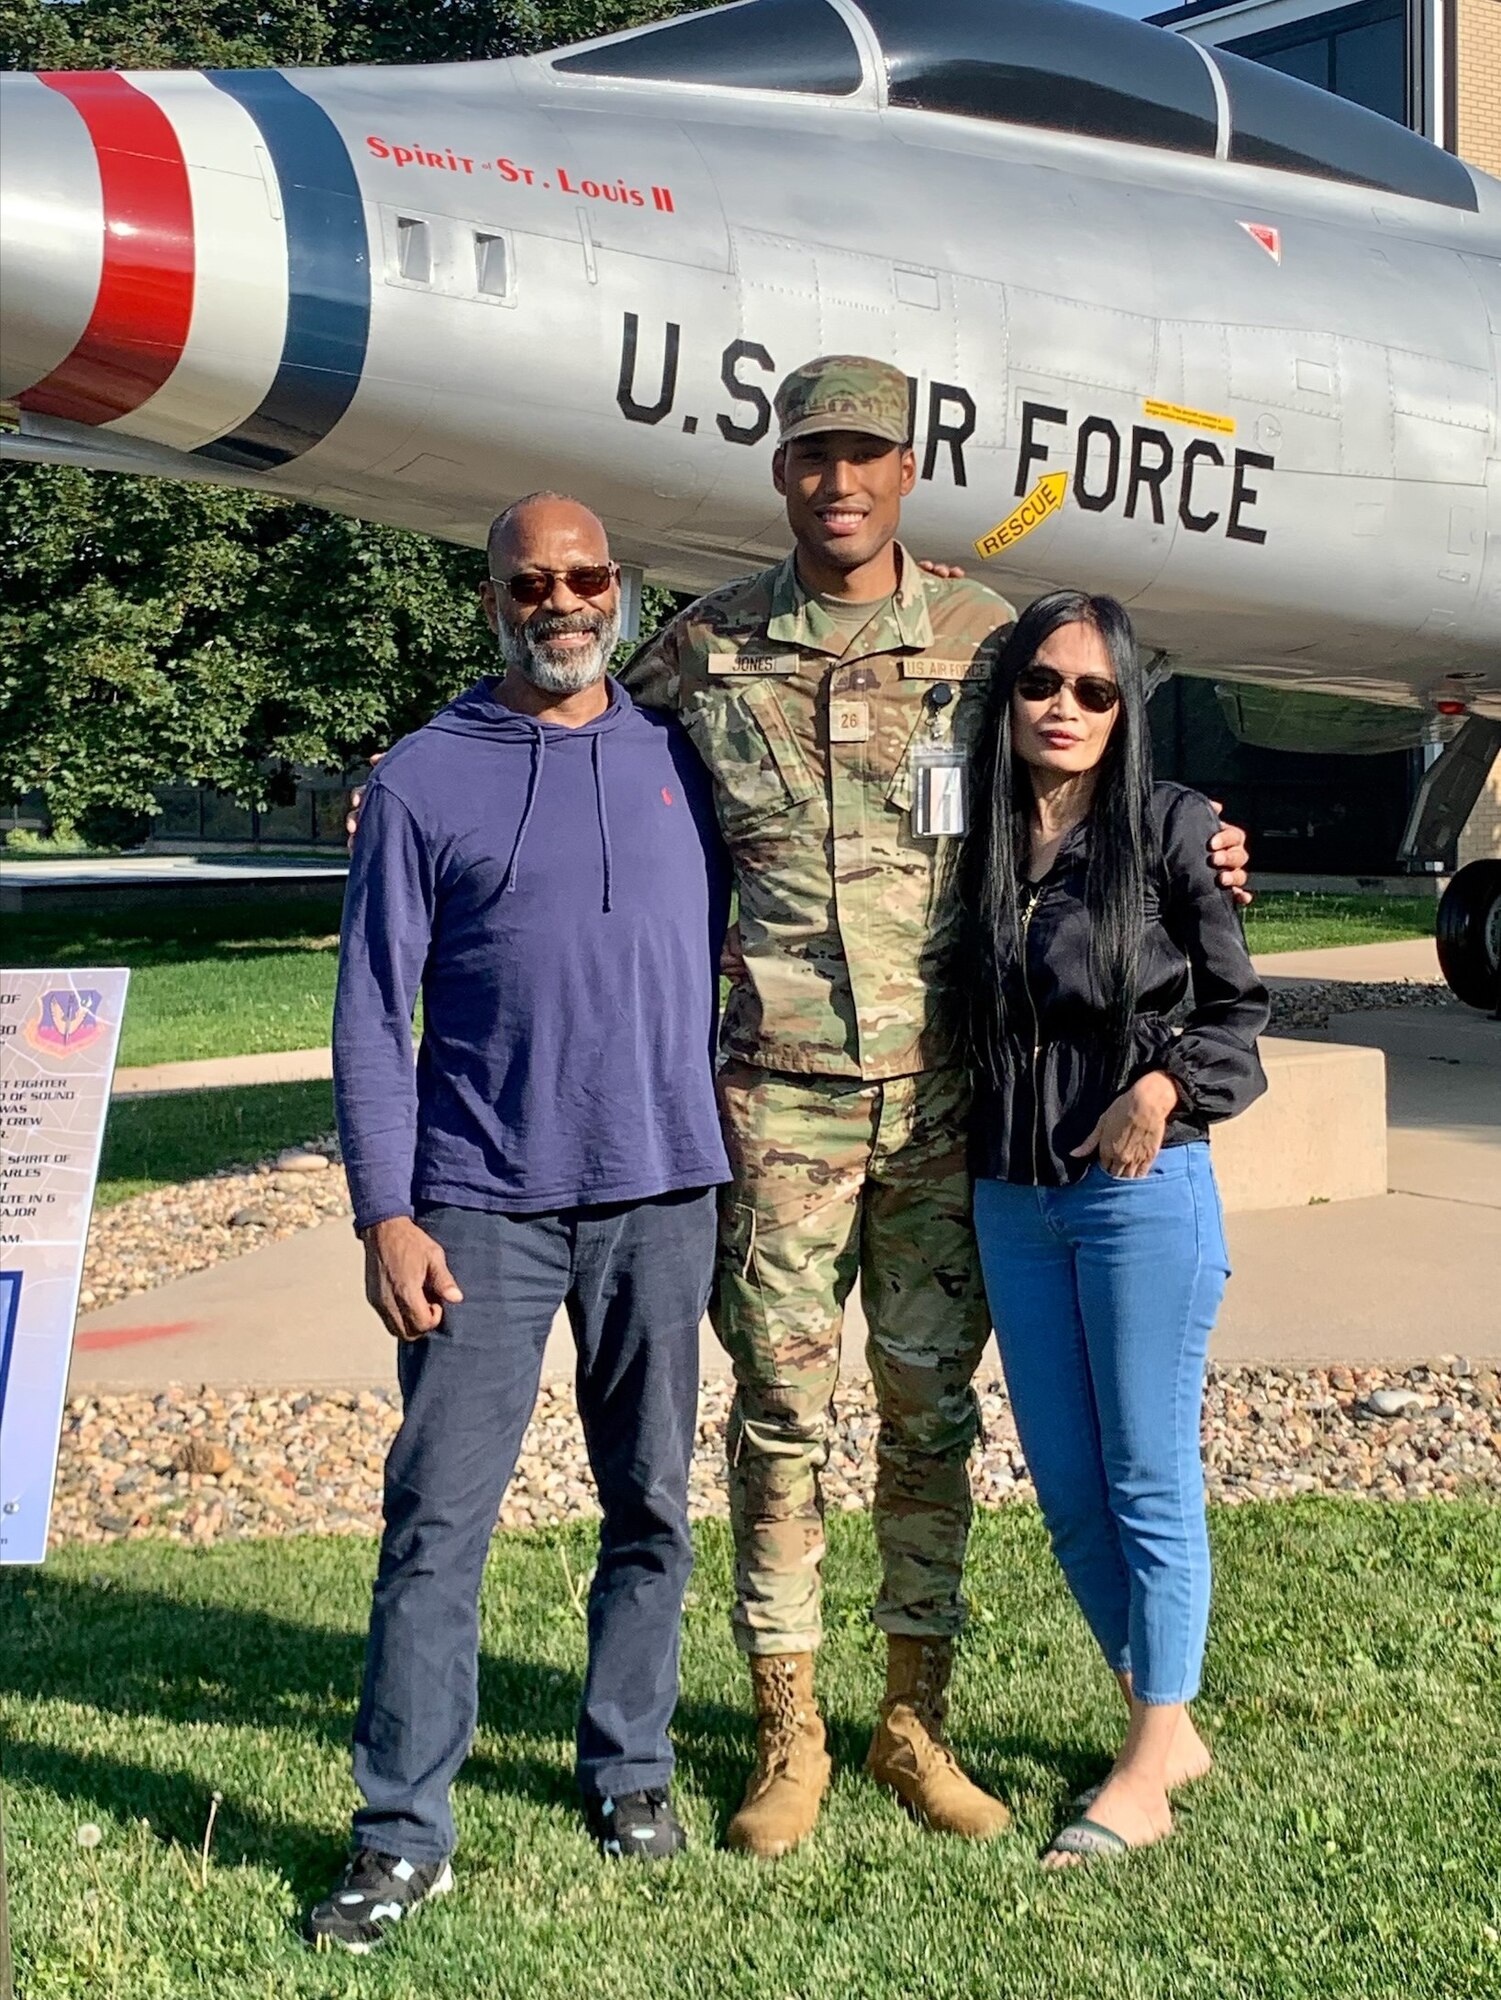 Cadet Candidate Solomon Jones poses for a photo with his father, Keith Jones, and mother, Moean Tamkanson Jones, at the U.S. Air Force Academy Preparatory School.